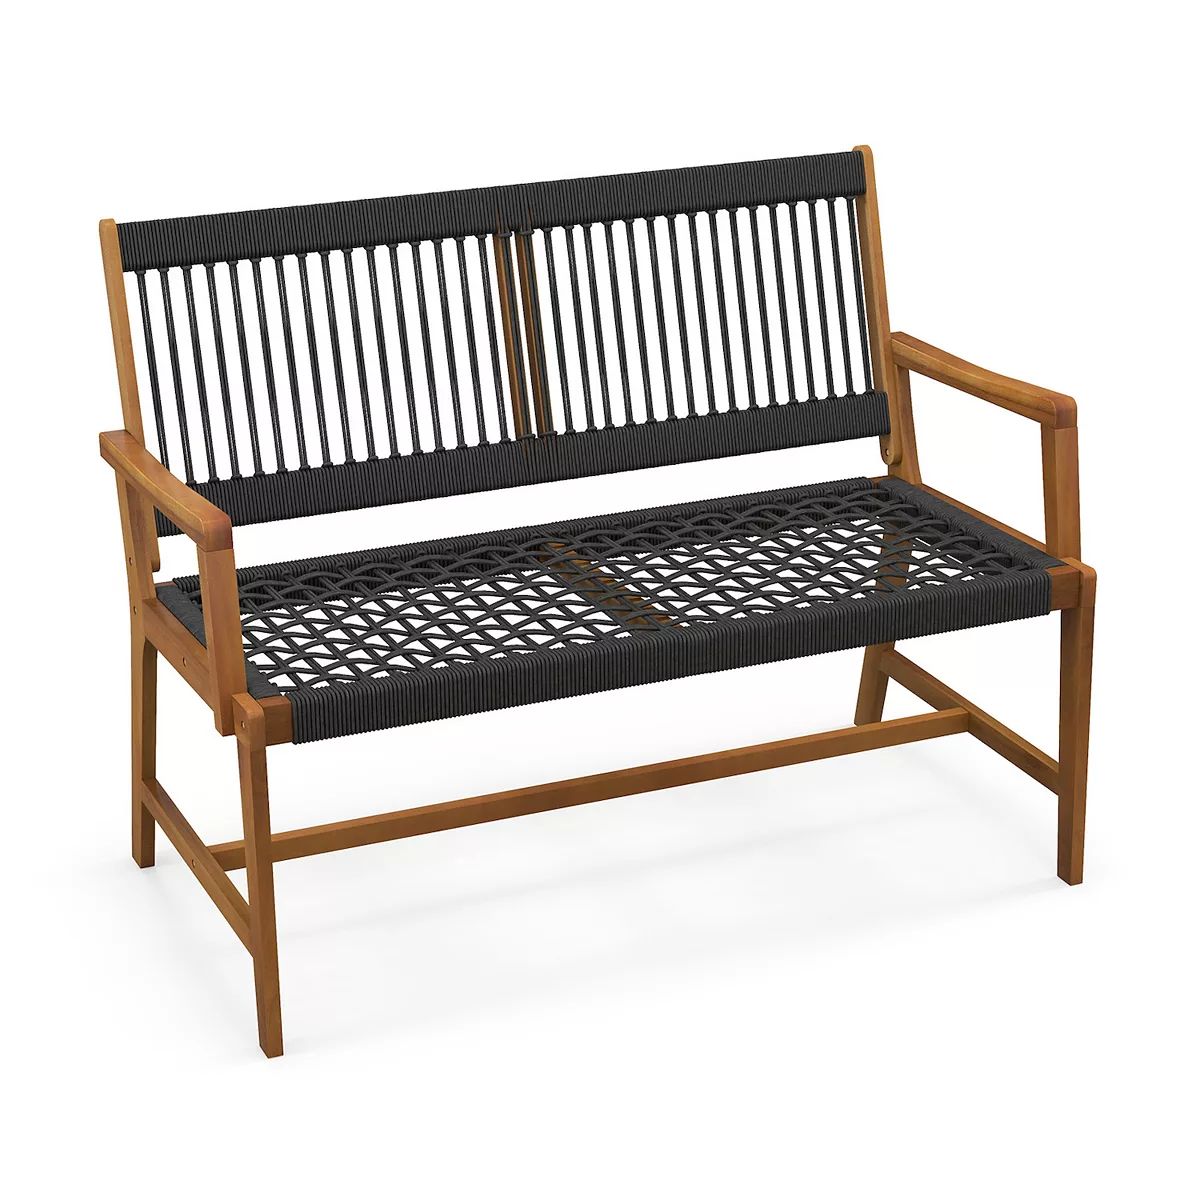 Outdoor Acacia Wood Bench With Backrest And Armrests | Kohl's